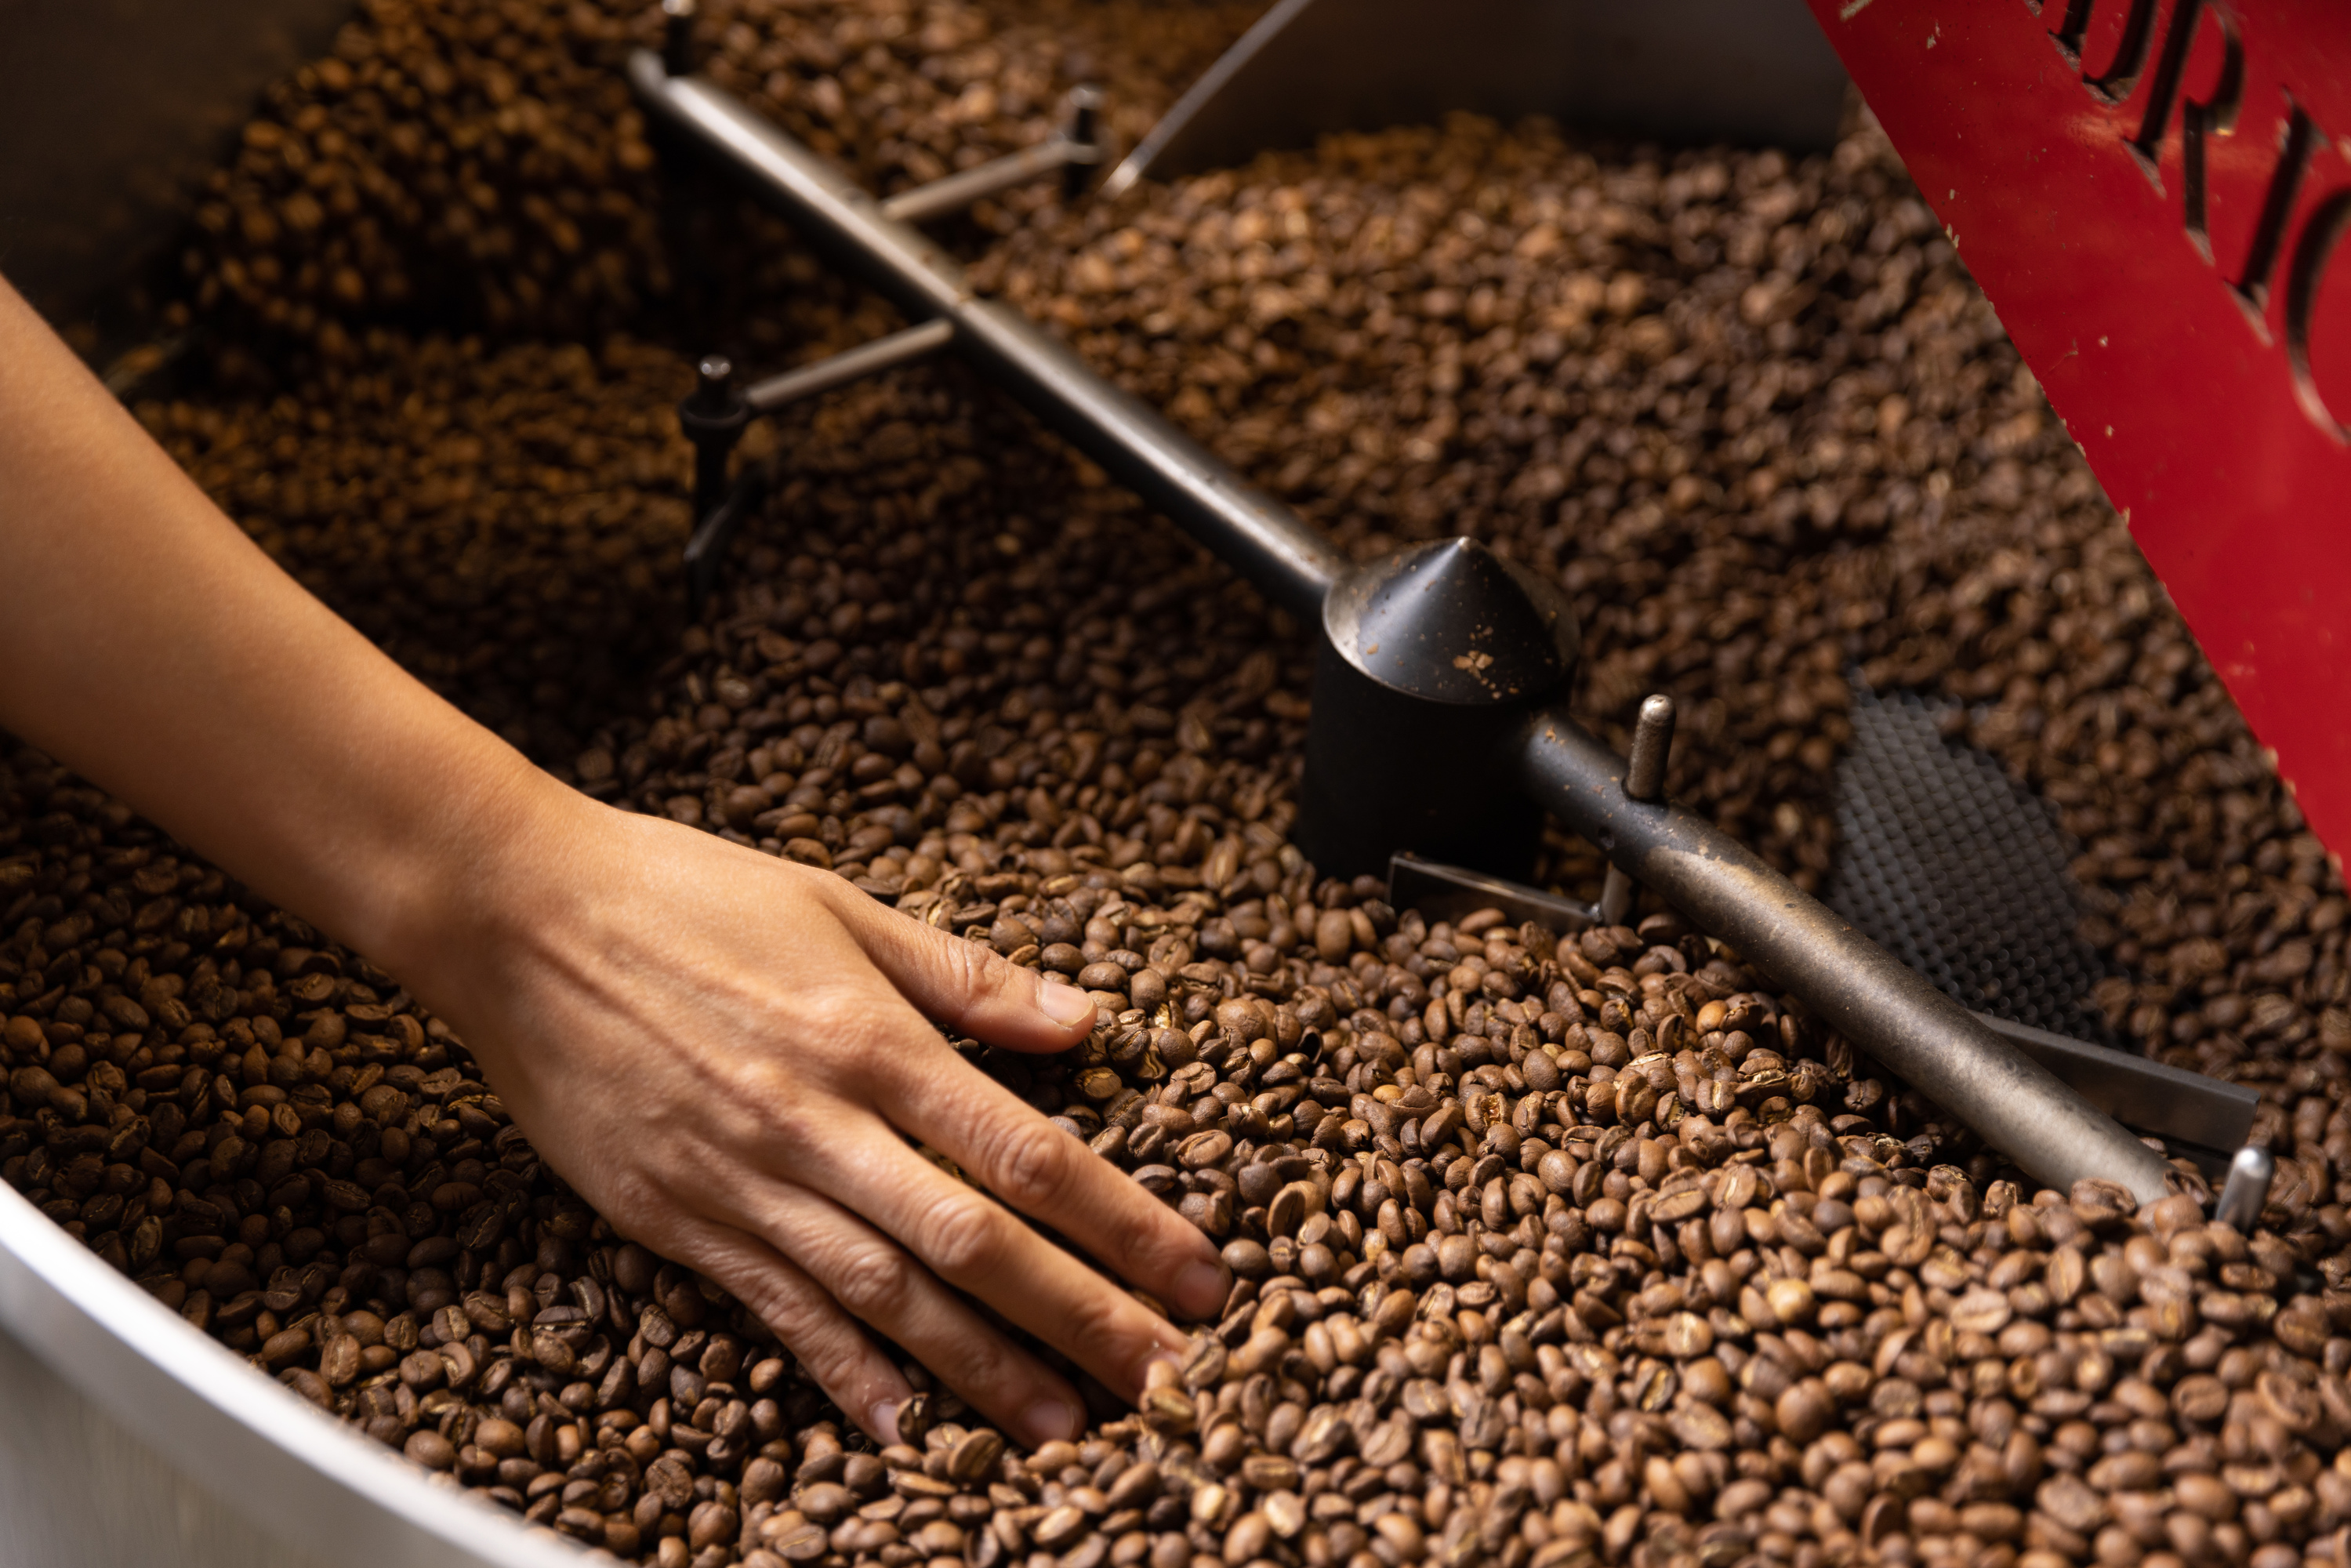 A hand reaches into a pile of roasted coffee beans.